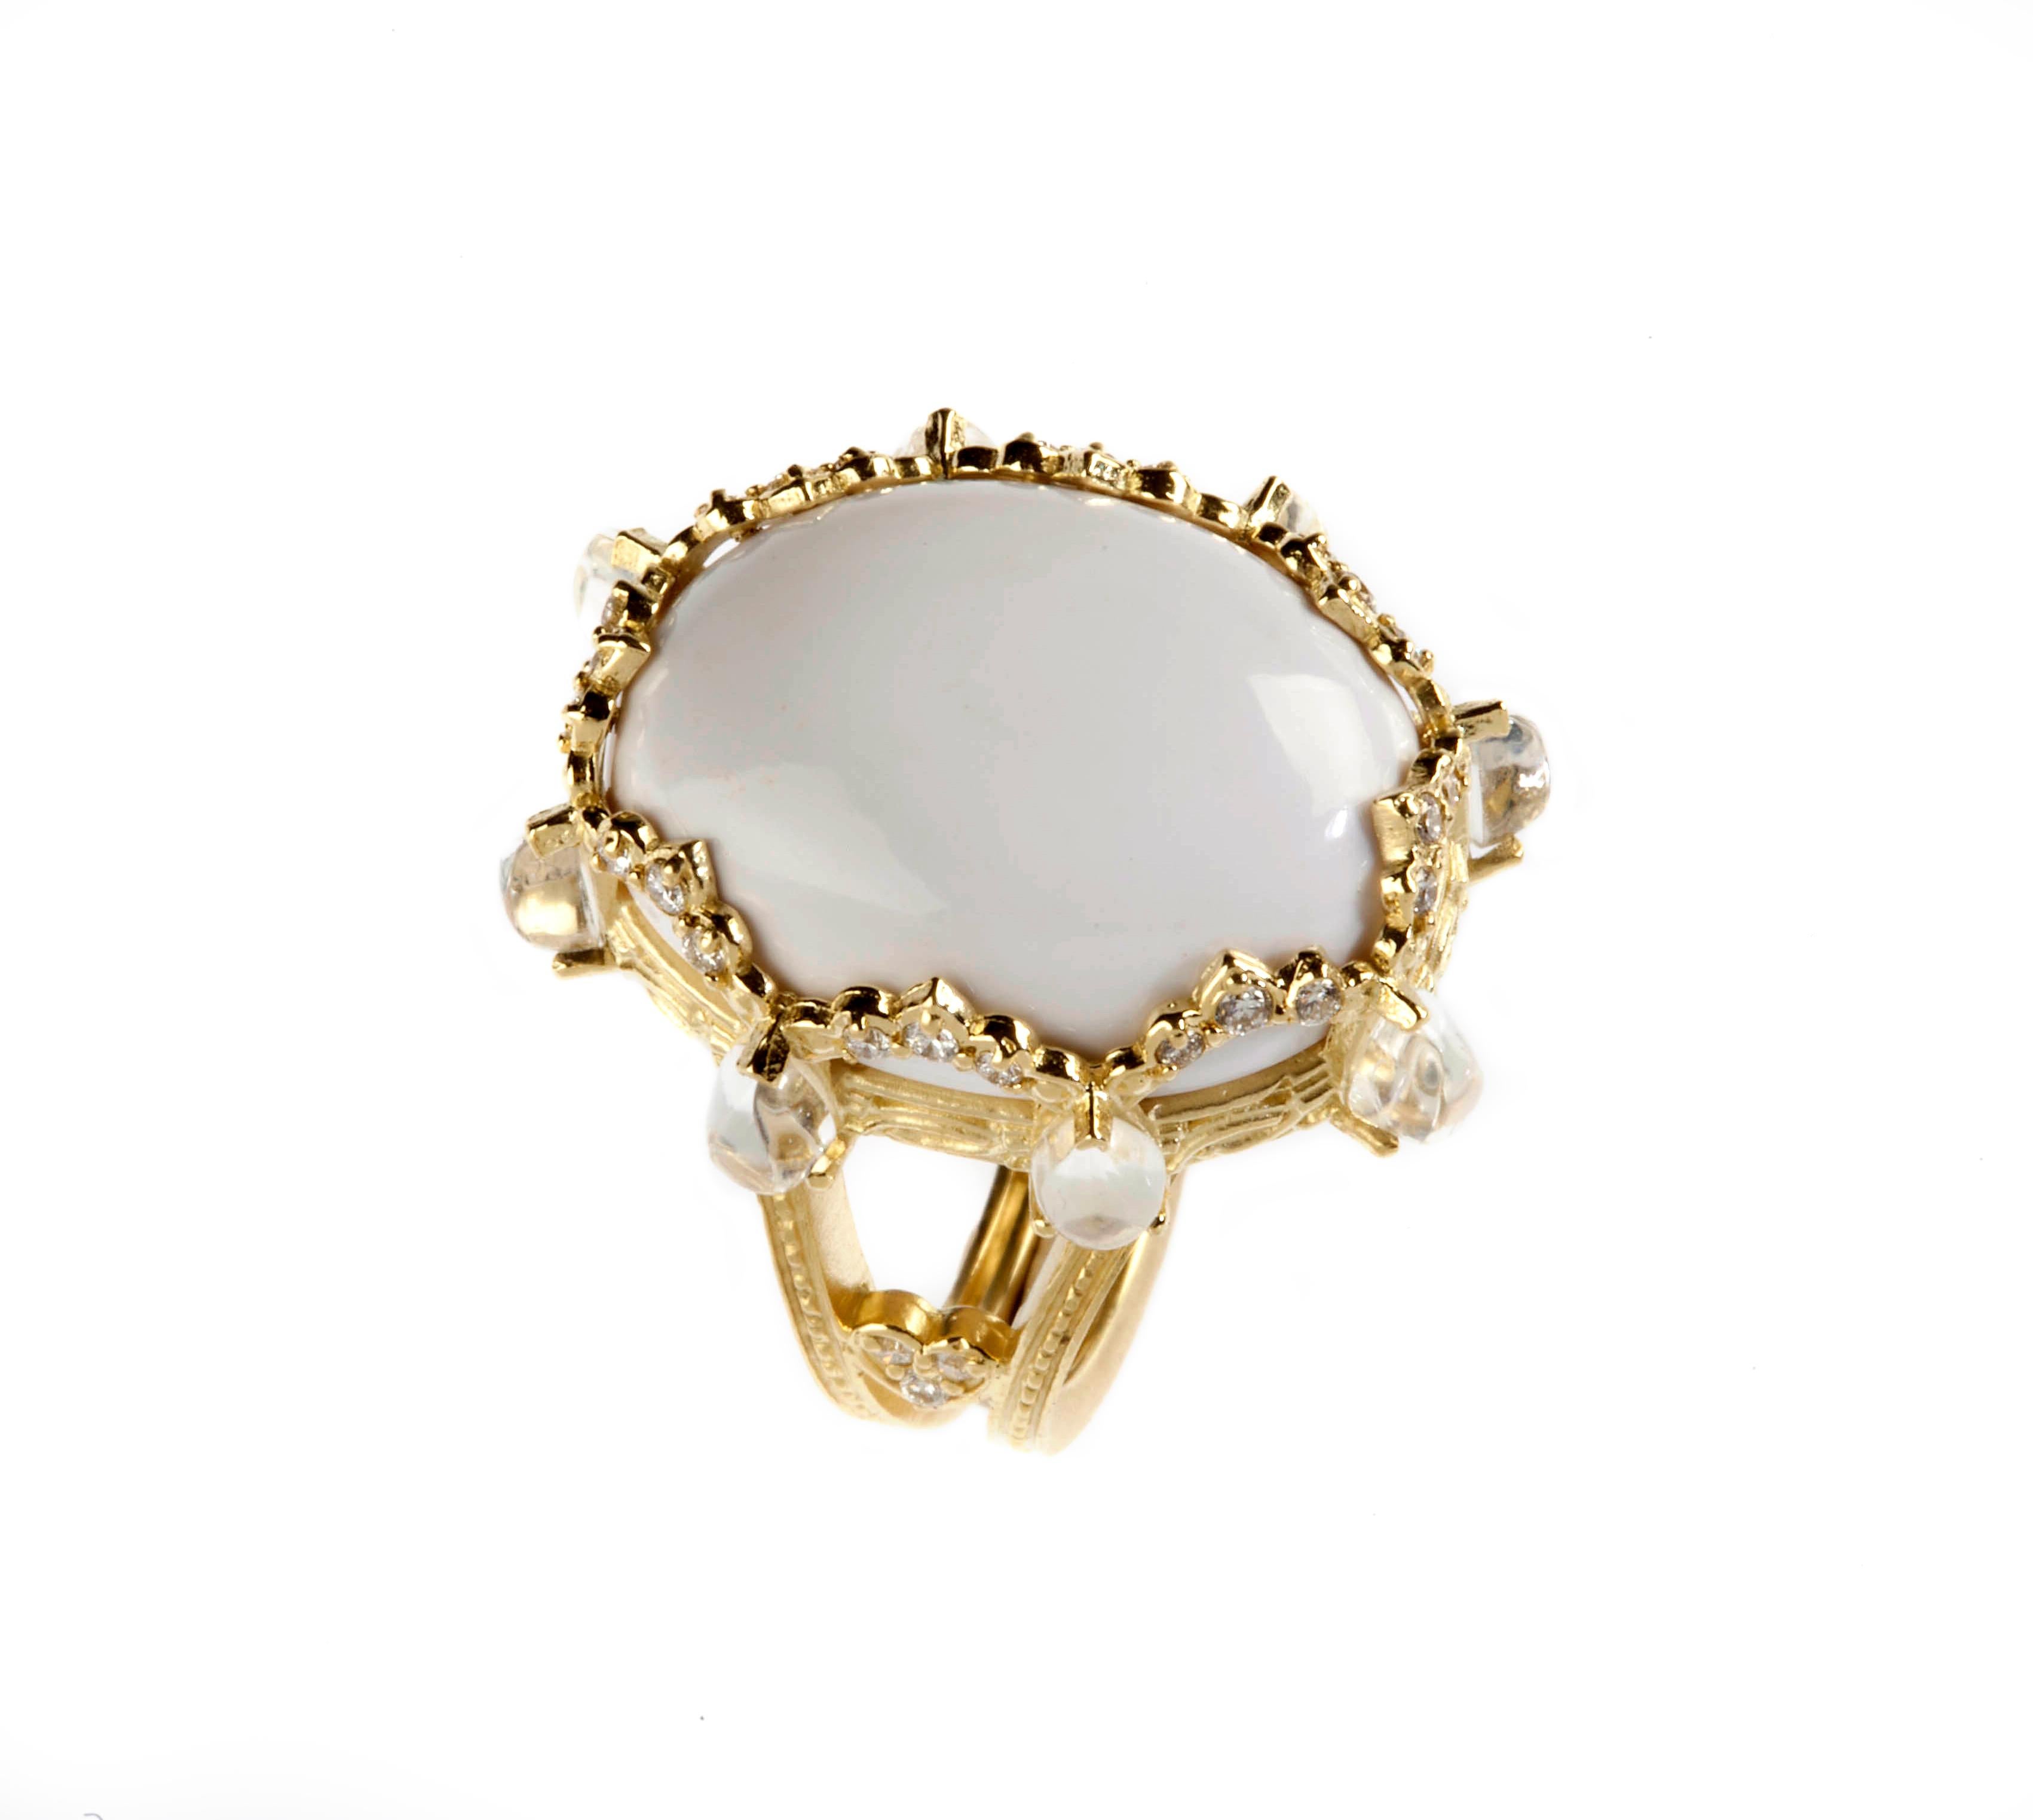 18K Gold and Diamond Oval Ring with White Agate Center and Rainbow Moonstones by Stambolian

Center stone is a 18.00 carat White Agate Center, 20 x 15mm

Surrounding the Center Stone are 0.22 carat G color VS clarity diamonds and eight Pear shape